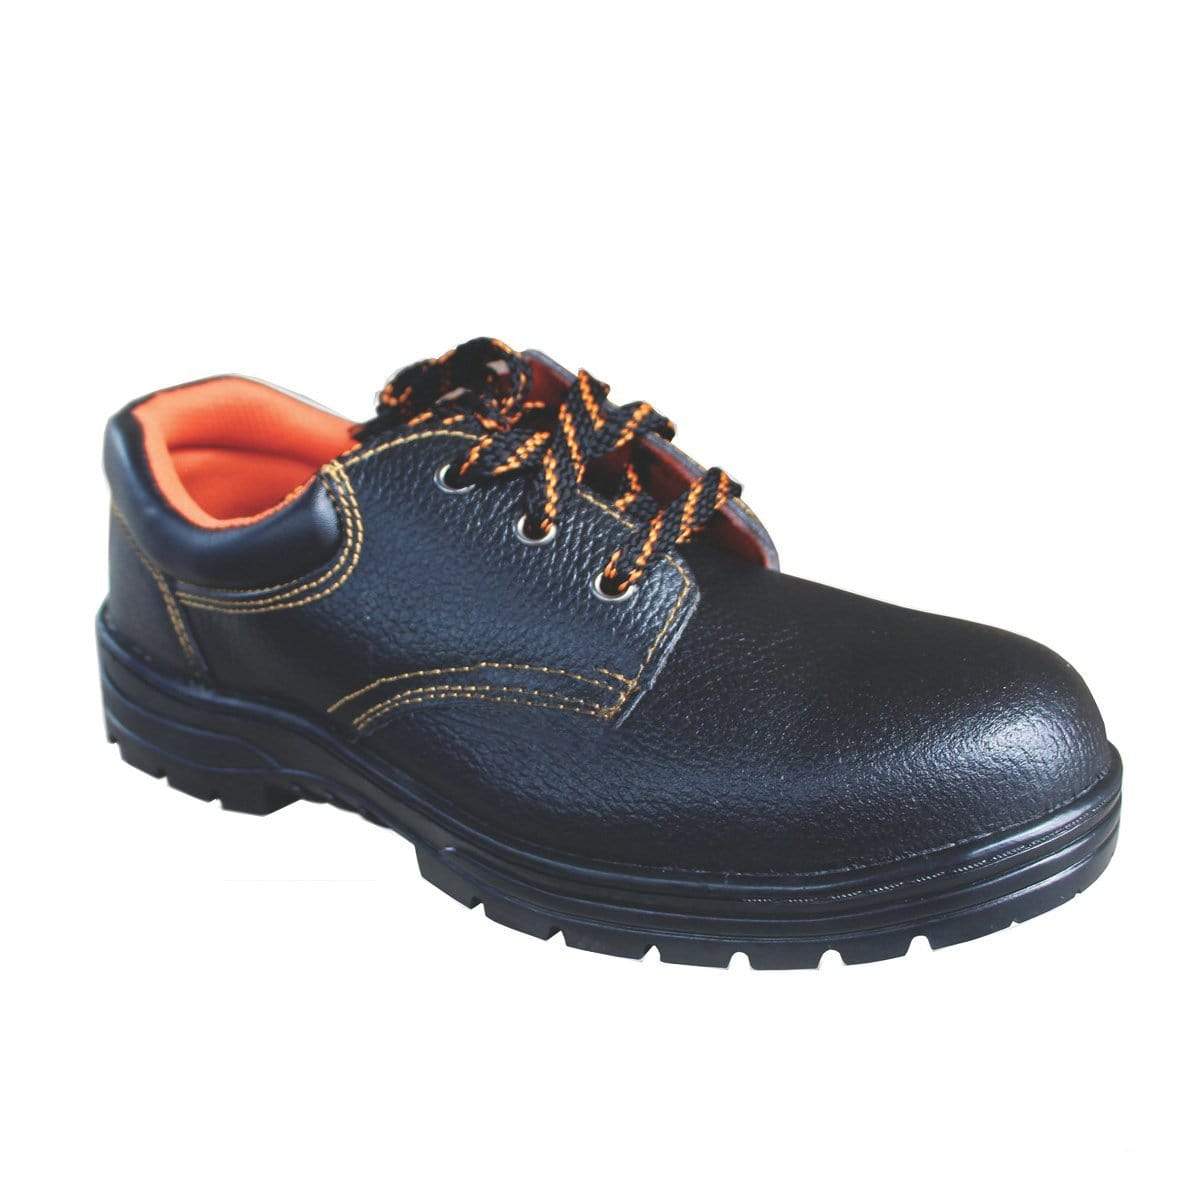 ANEKA Worker Safety Shoes Safety Boots Steel Toe Cap Kasut UK12 1000#